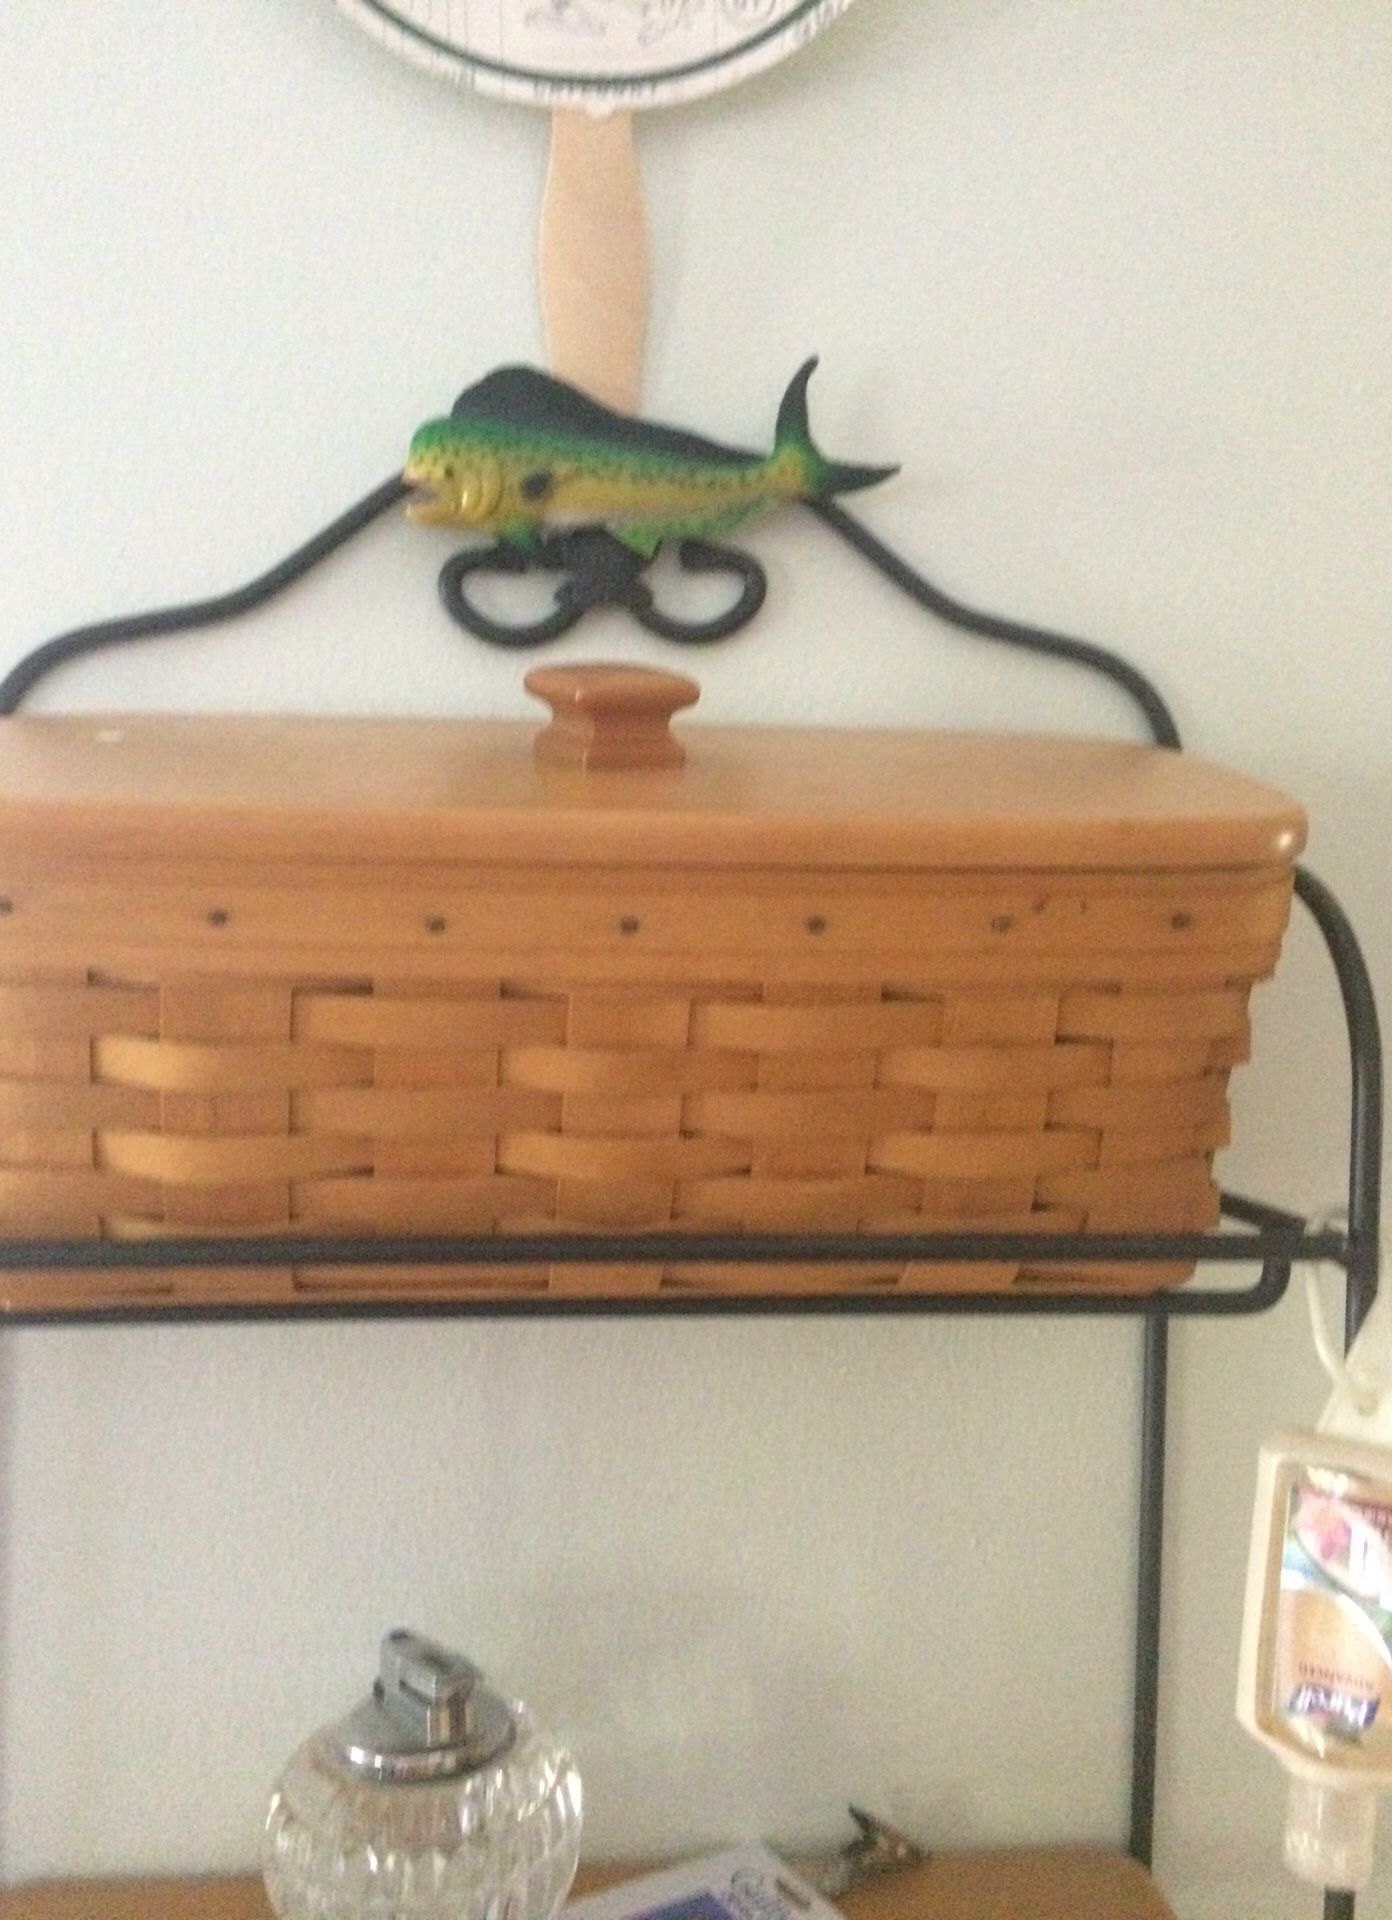 Longaberger baskets. All sizes and shapes